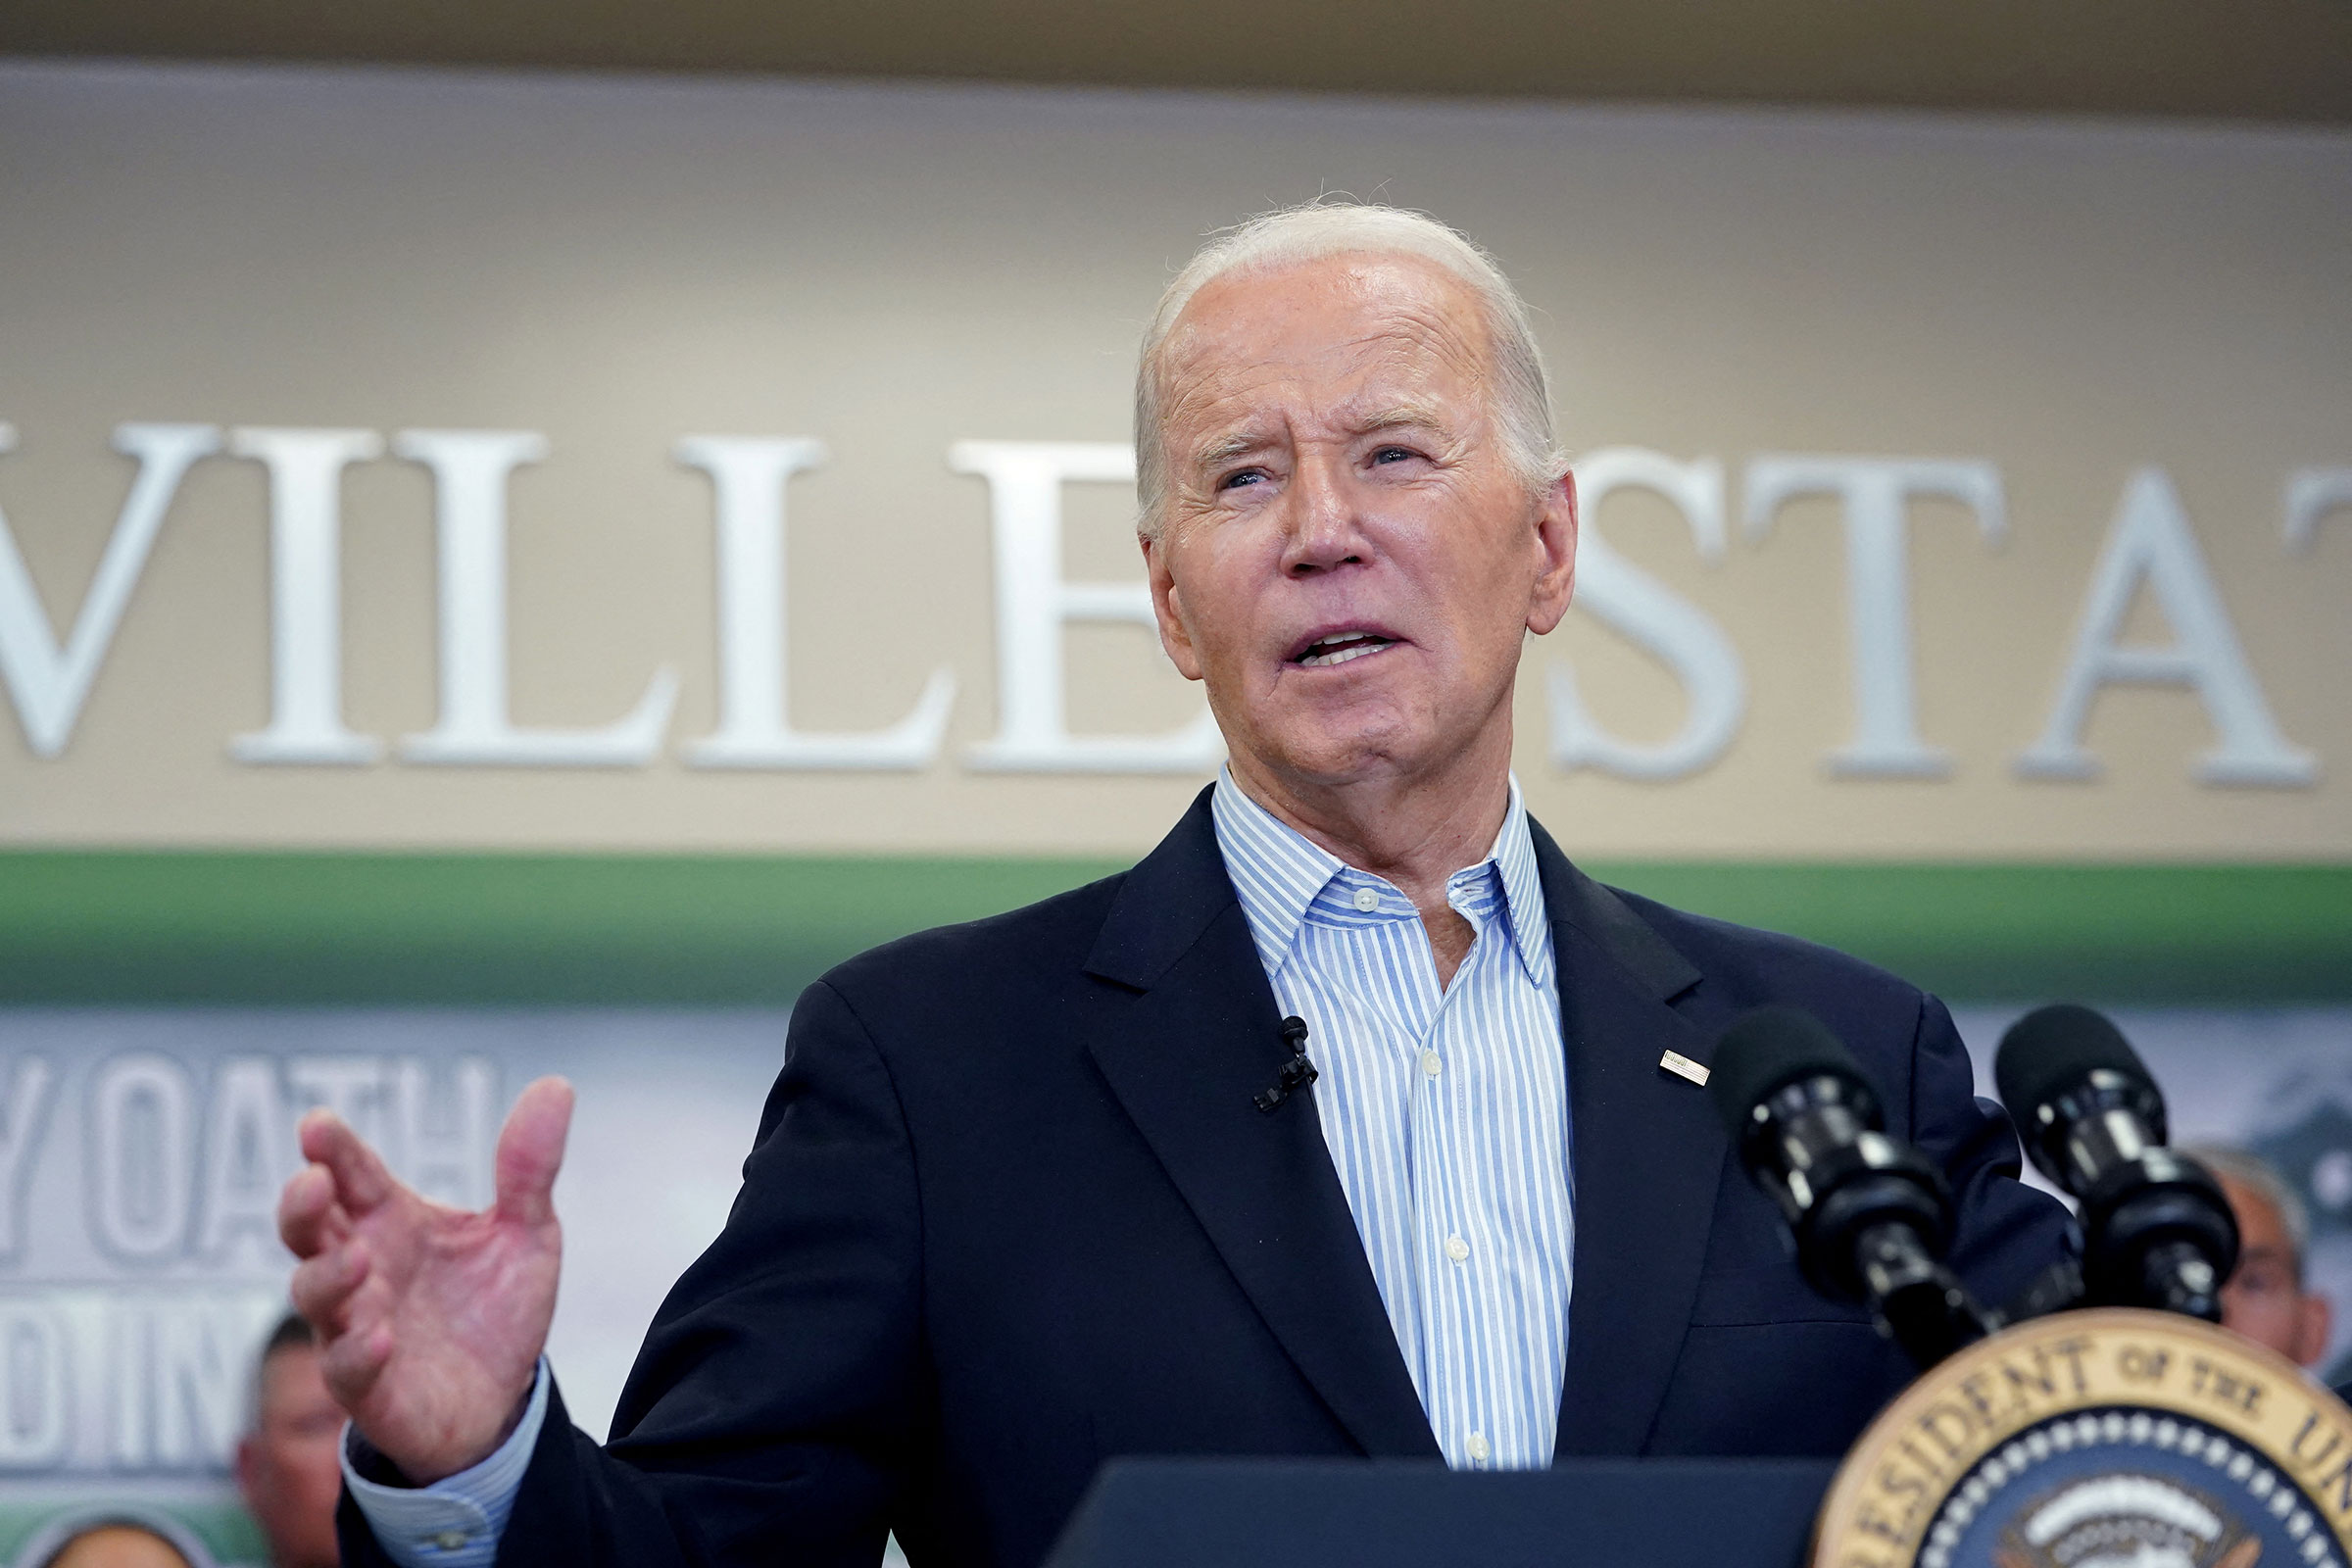 President Joe Biden speaks during his visit to the US-Mexico border in Brownsville, Texas, on February 29.